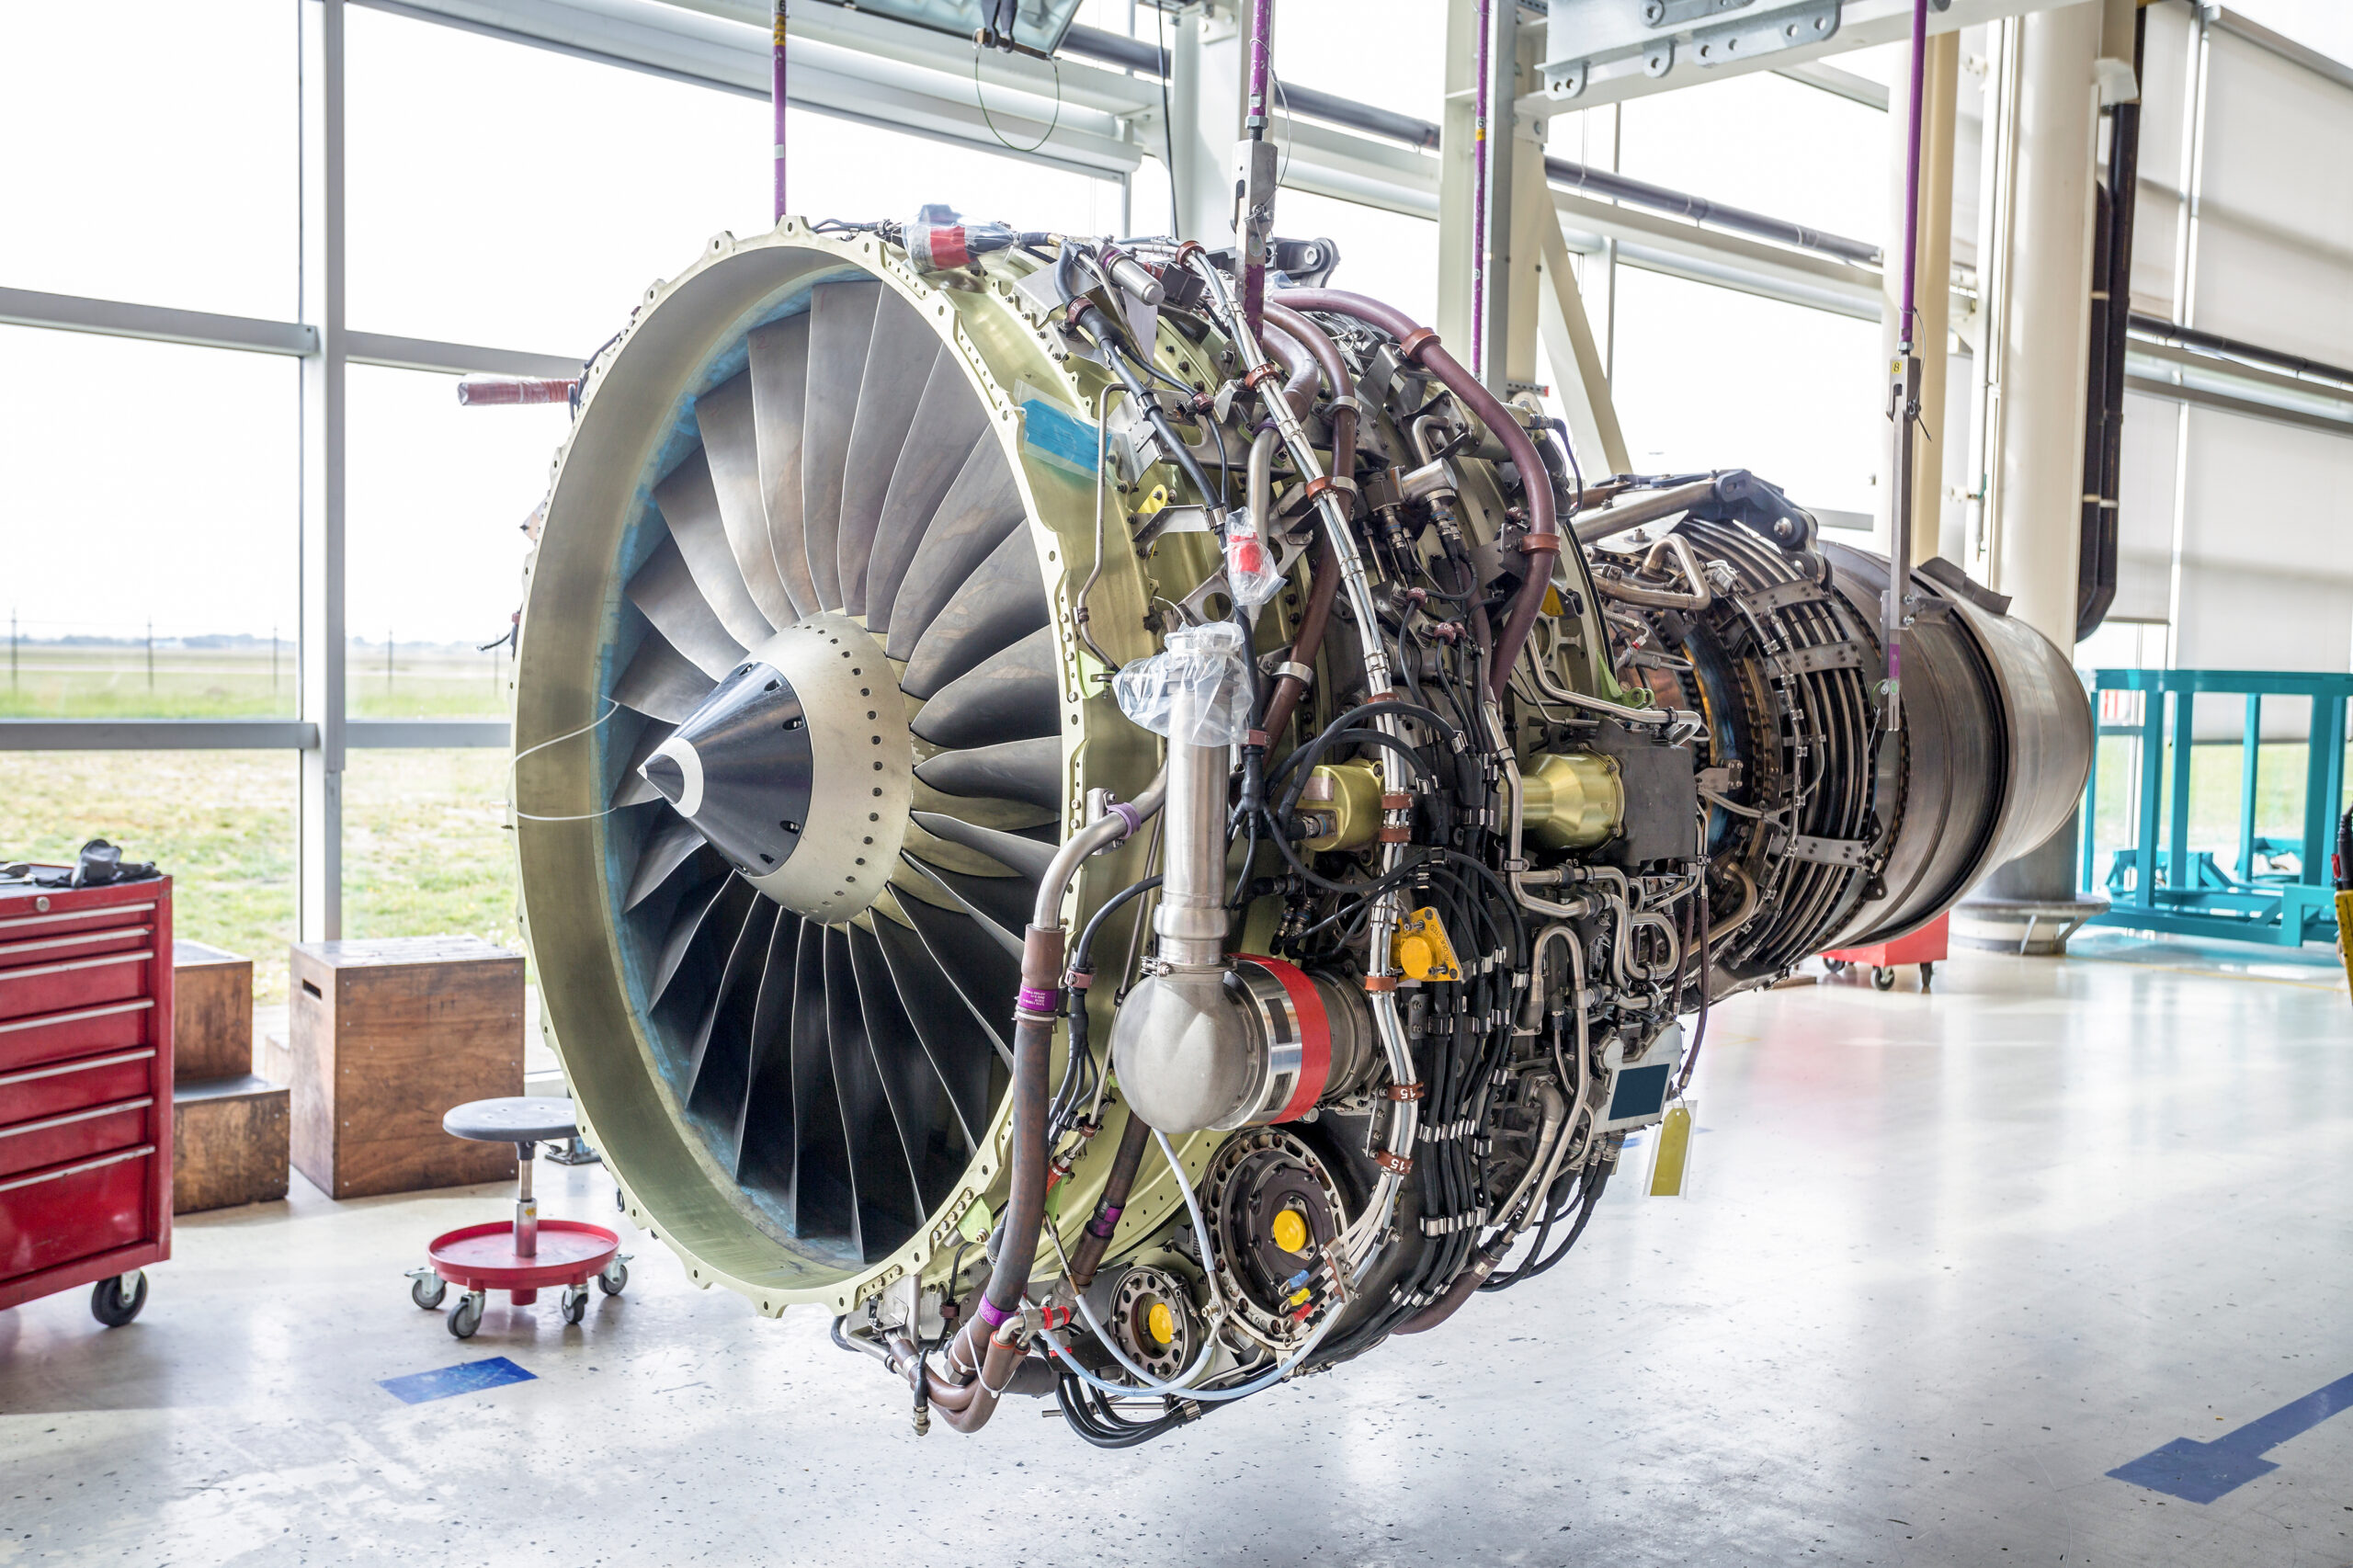 Jet-Engine-Being-Assembled-or-Serviced-Hanging-from-Girders